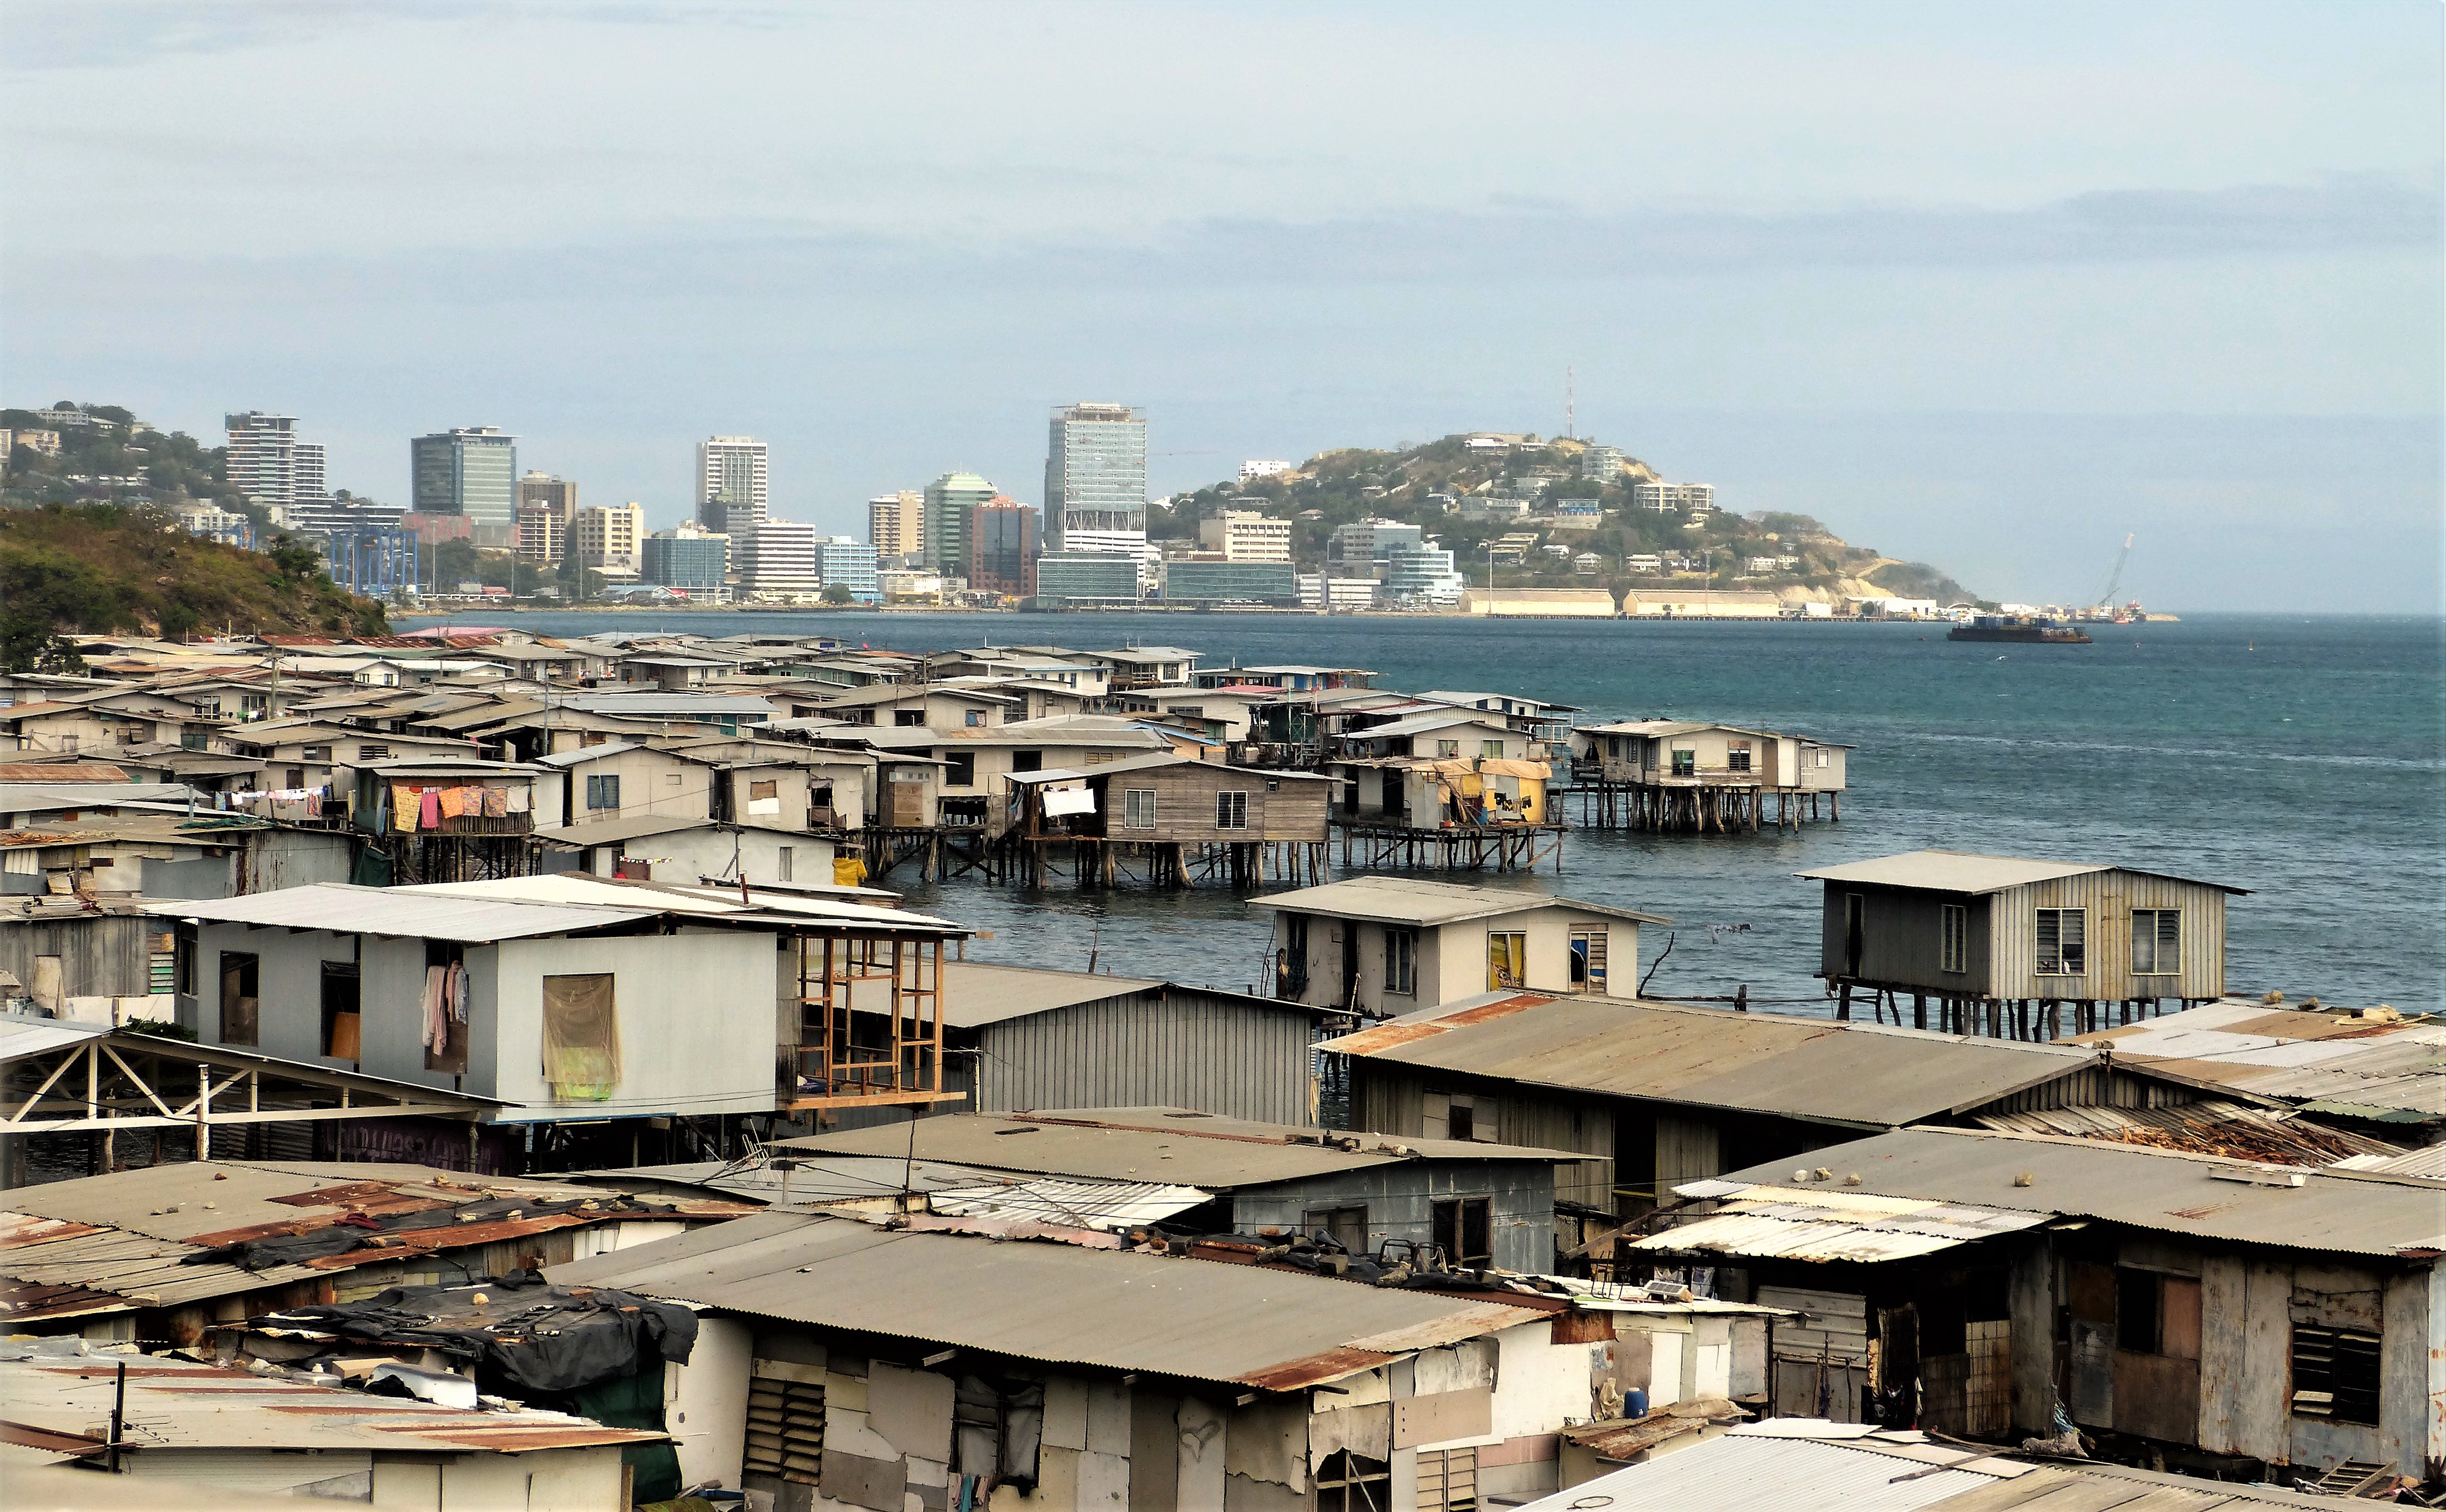 Port Moresby, Papua New Guinea (photo credit: gailhampshire/flickr)